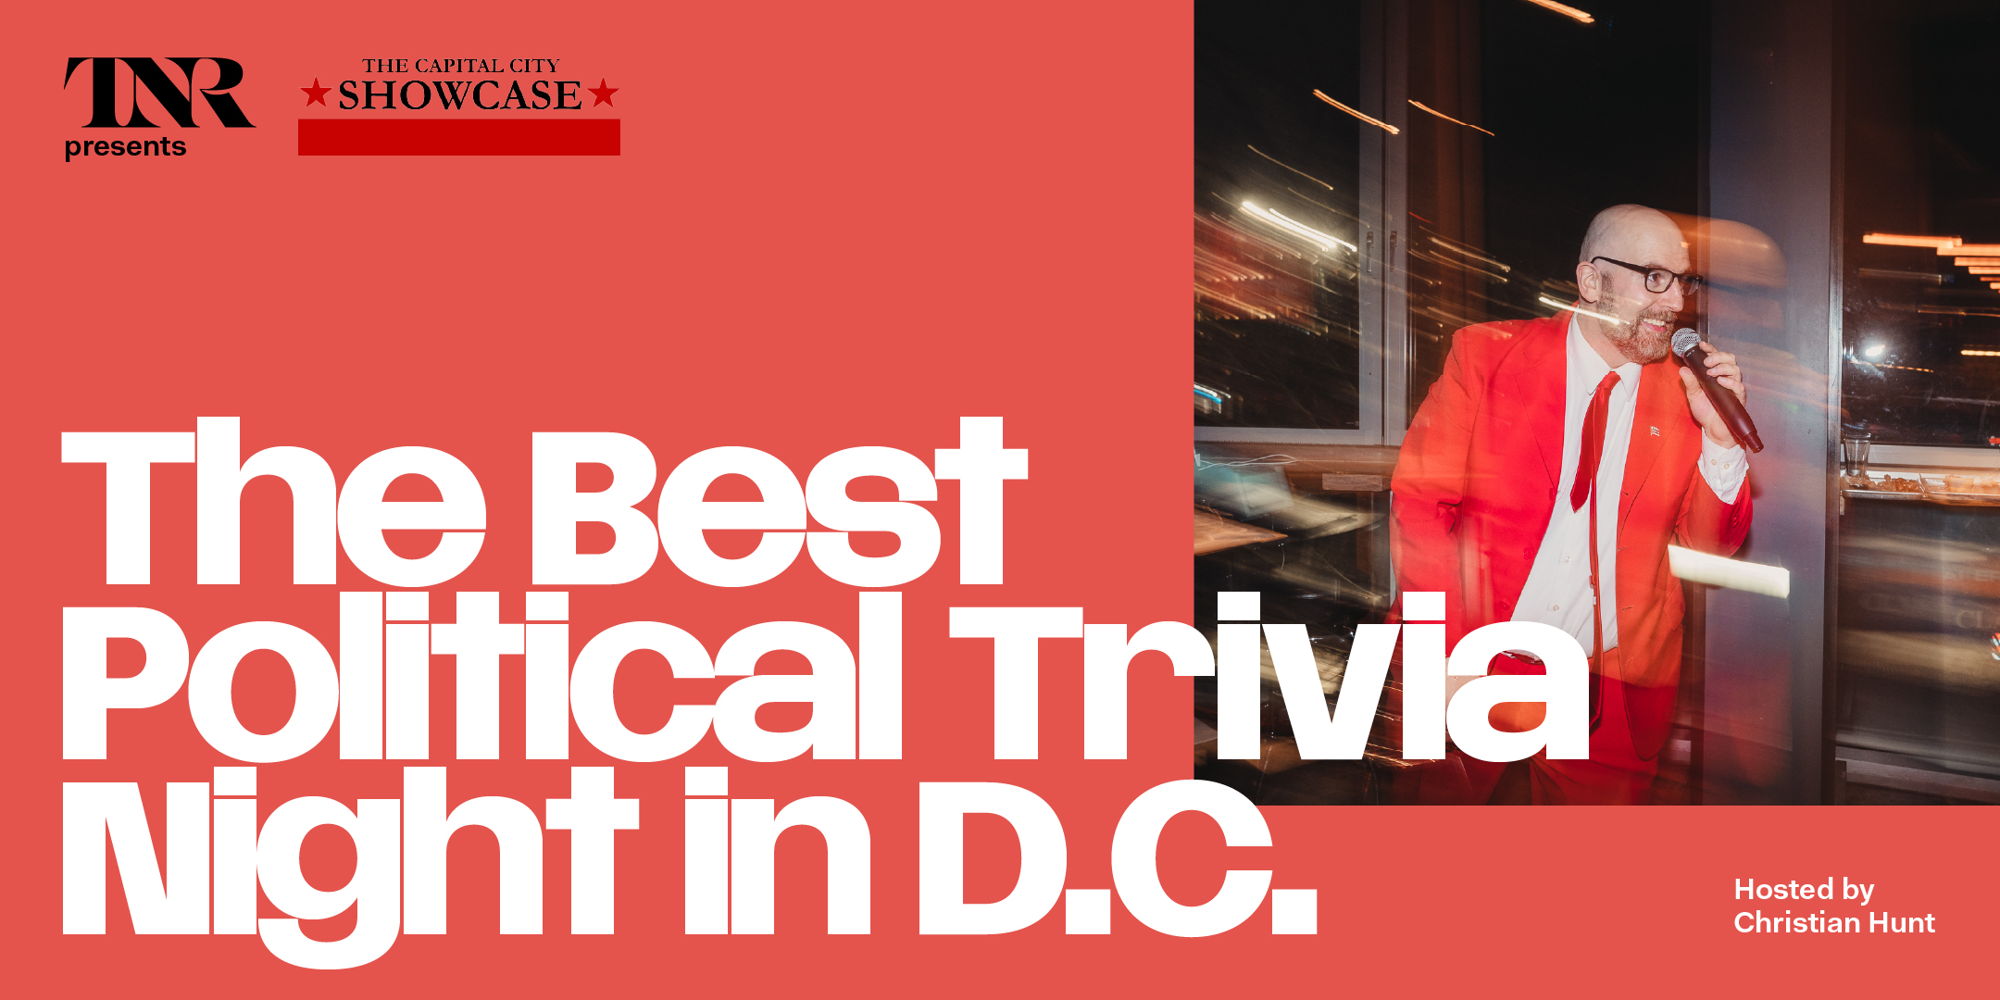 The New Republic presents: The Best Political Trivia Night in D.C. with The Capital City Showcase promotional image